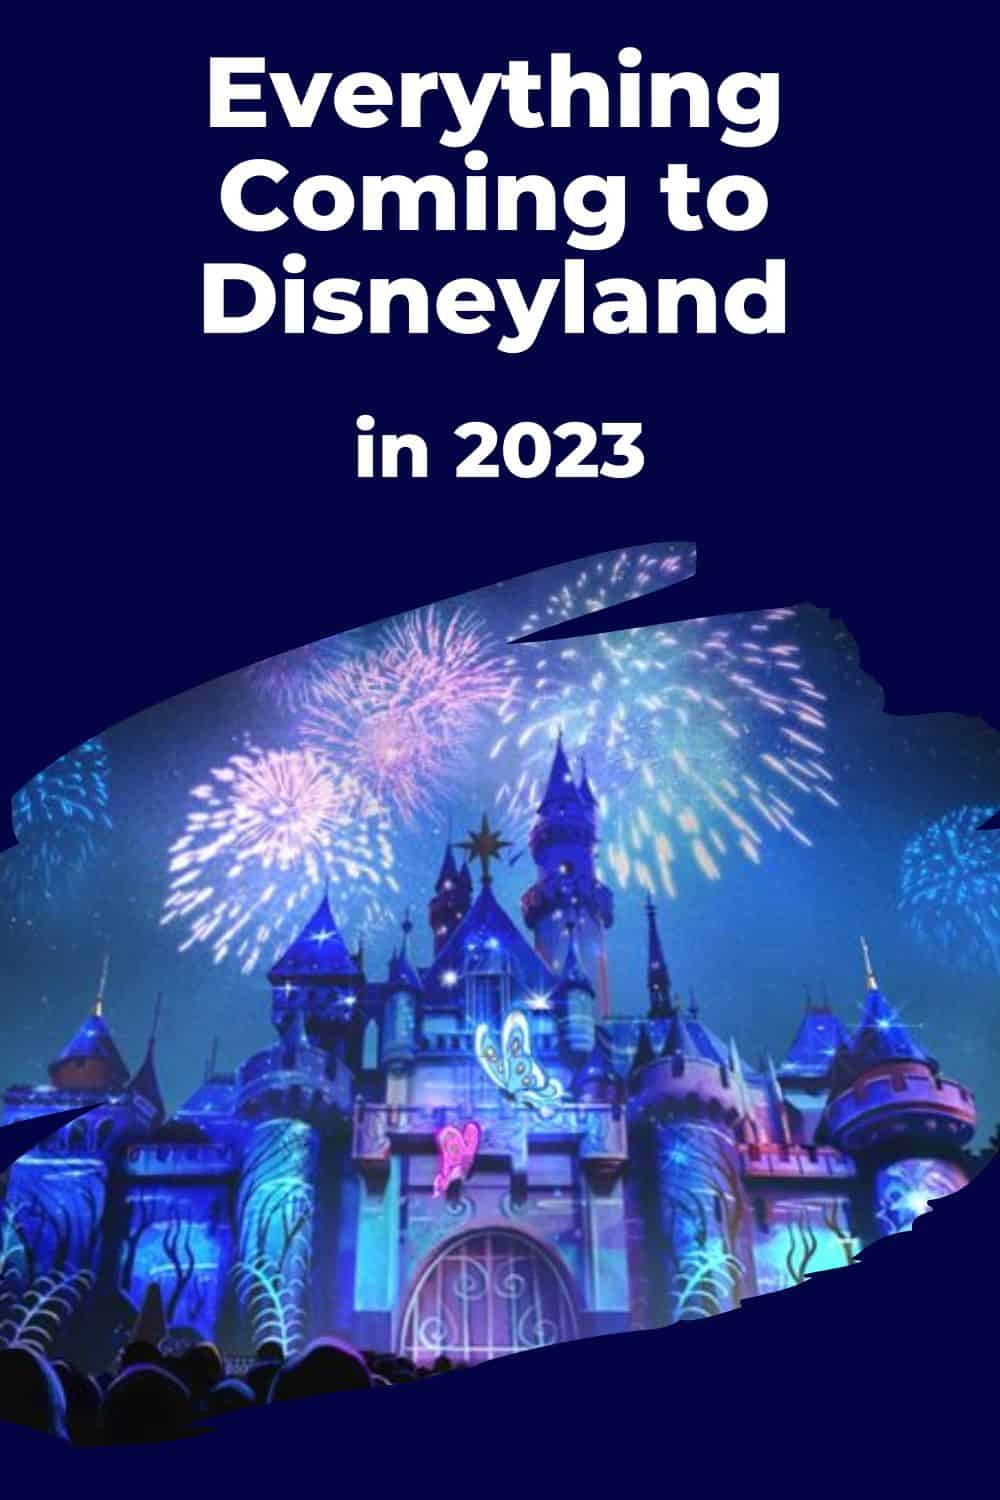 Sleeping Beauty Castle with fireworks, surrounded by dark blue background with text overlay "Everything Coming to Disneyland in 2023"